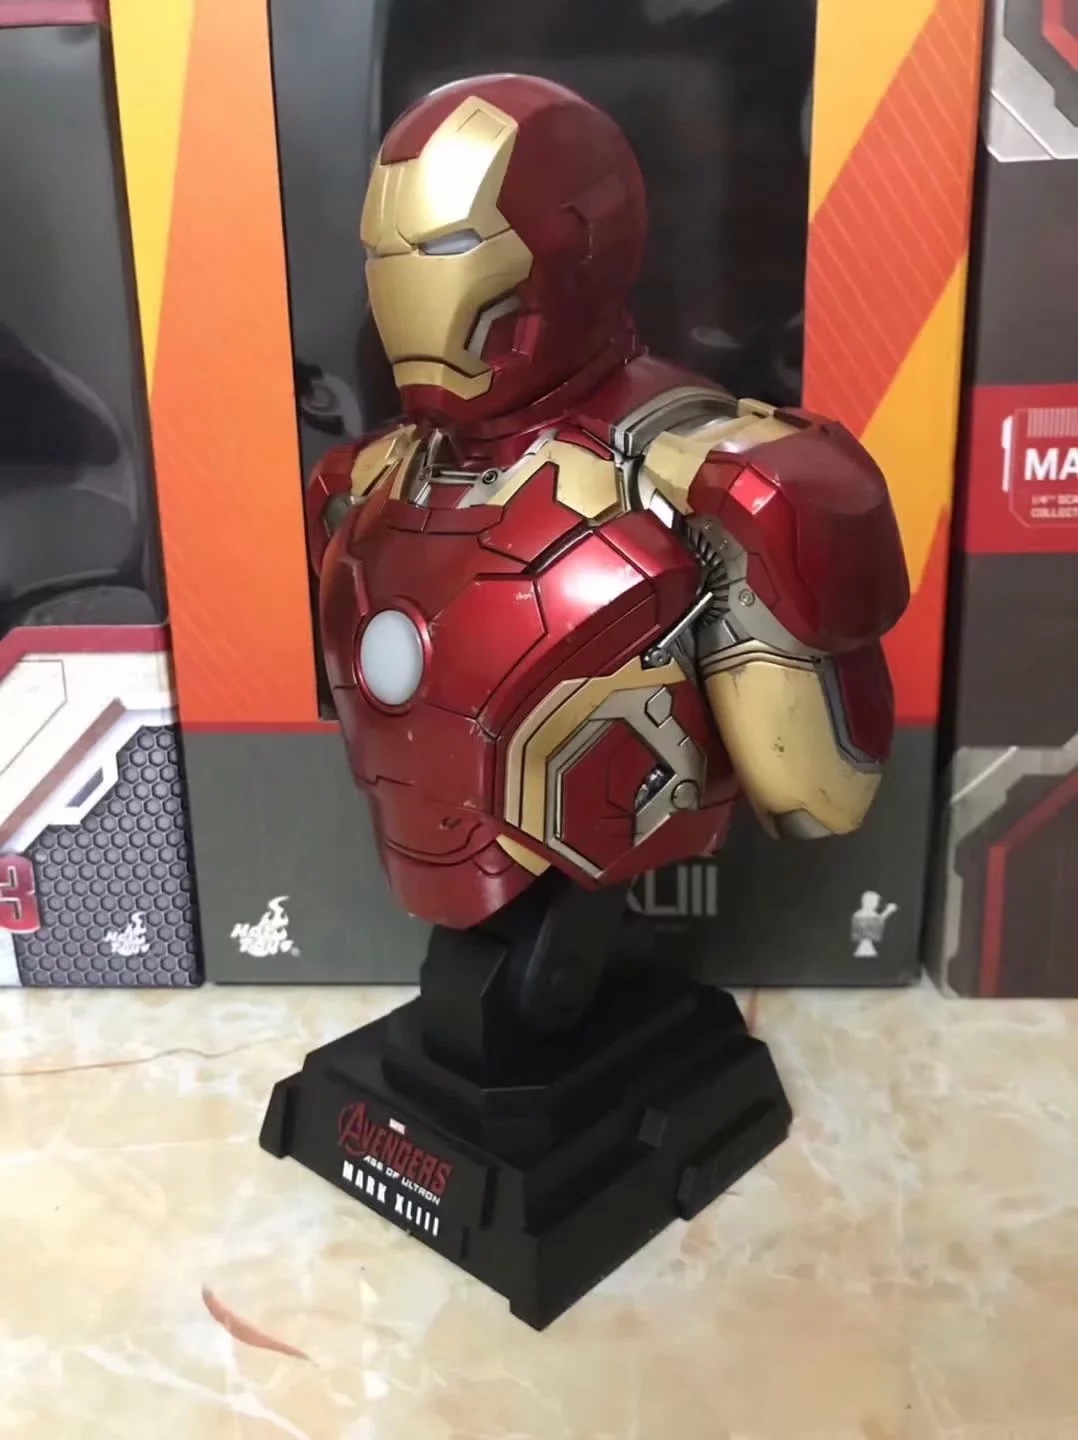 Marvel Iron Man Mark XLIII 43 Bust Pre-painted Model Kit with LED Light PVC Action Figure Model Toy